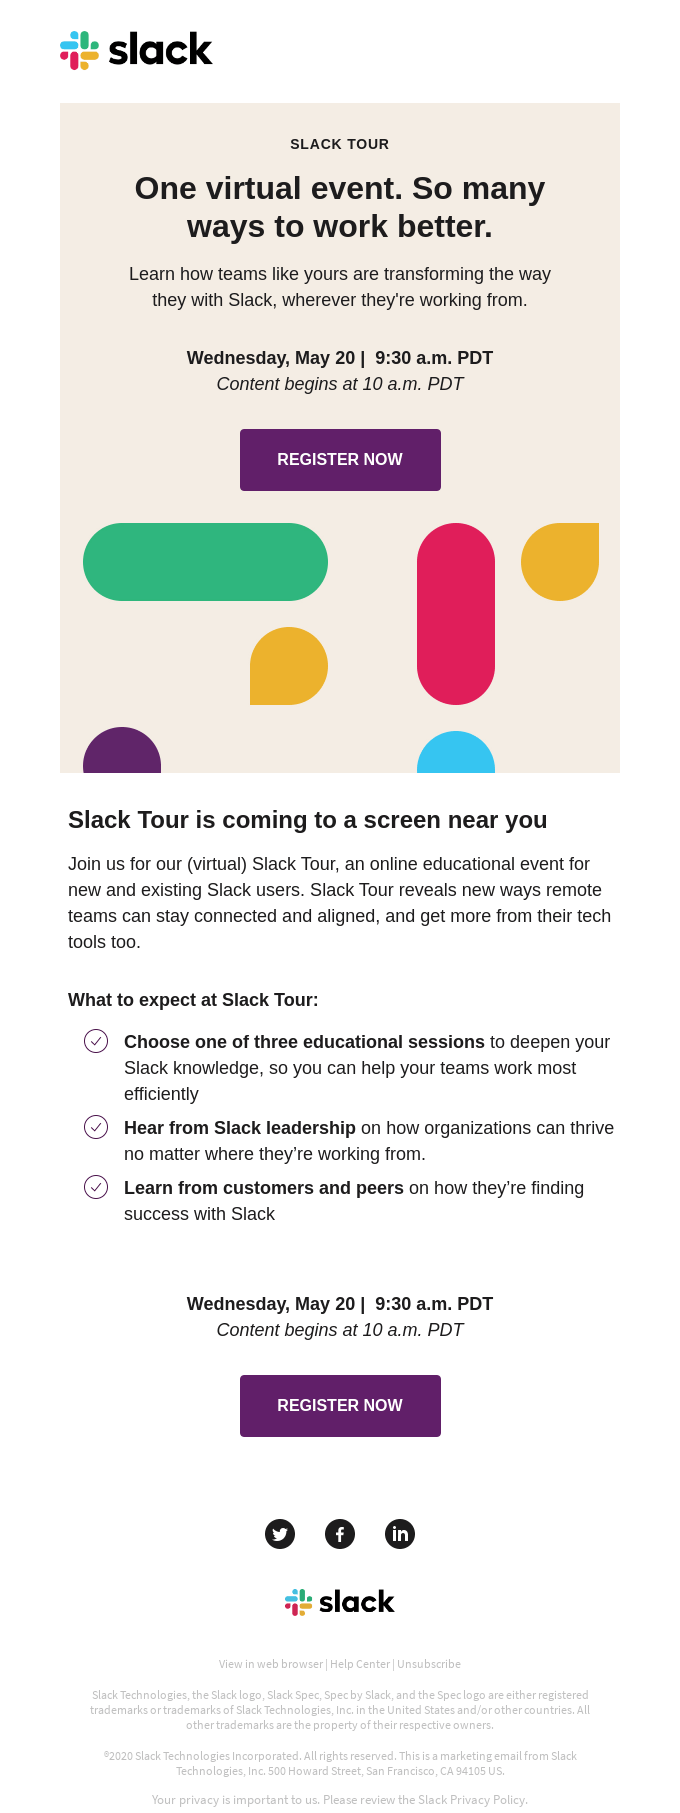 Why you won’t want to miss Slack Tour